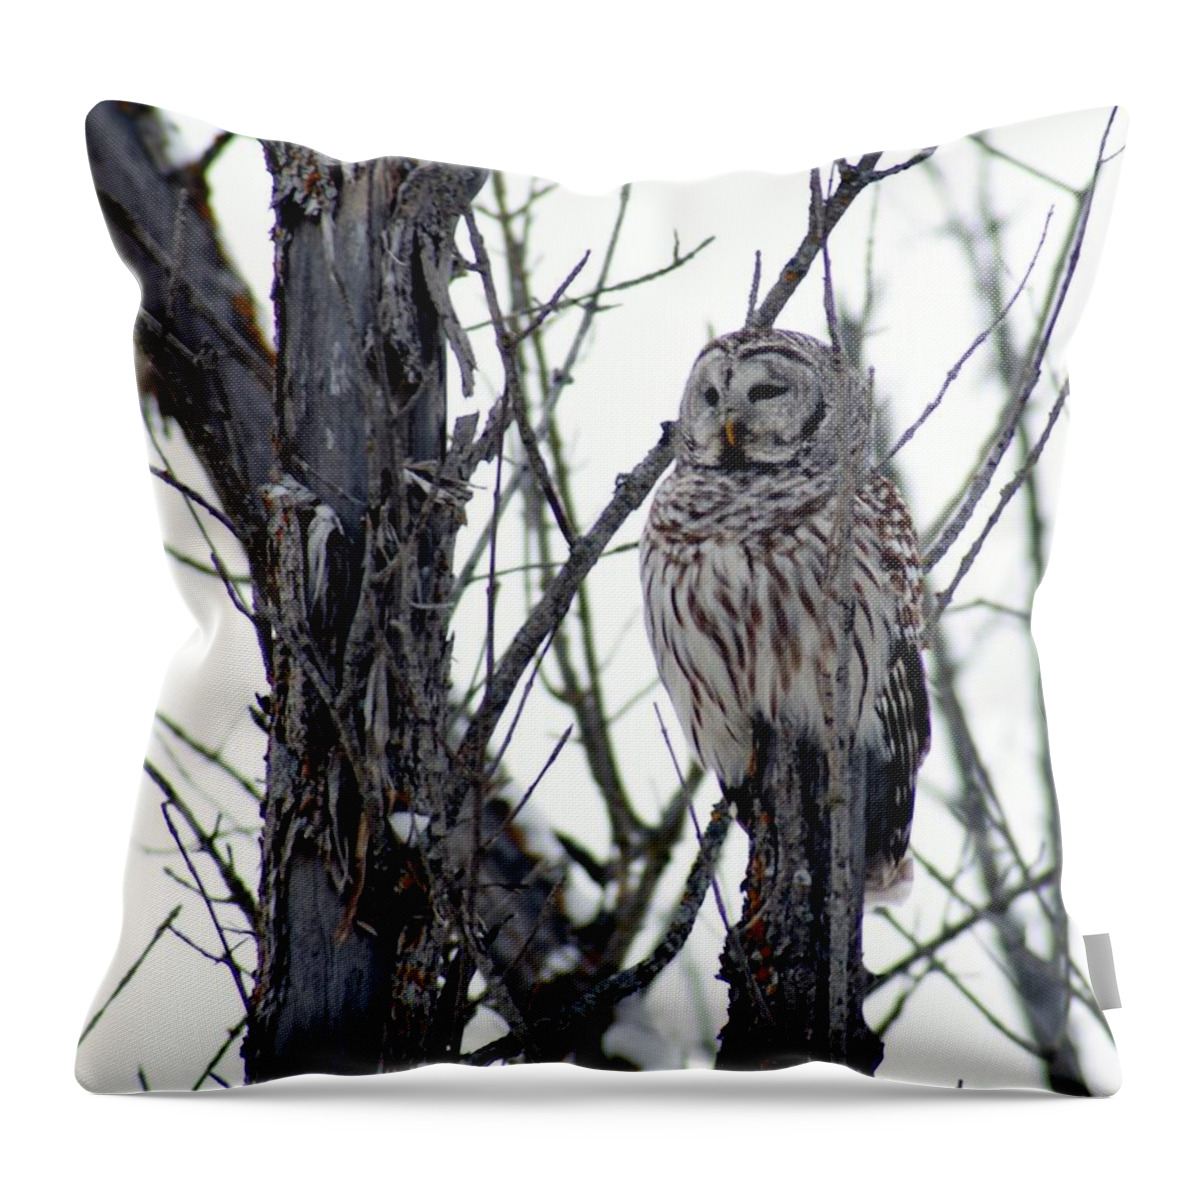 Owl Throw Pillow featuring the photograph Barred Owl 2 by Steven Clipperton